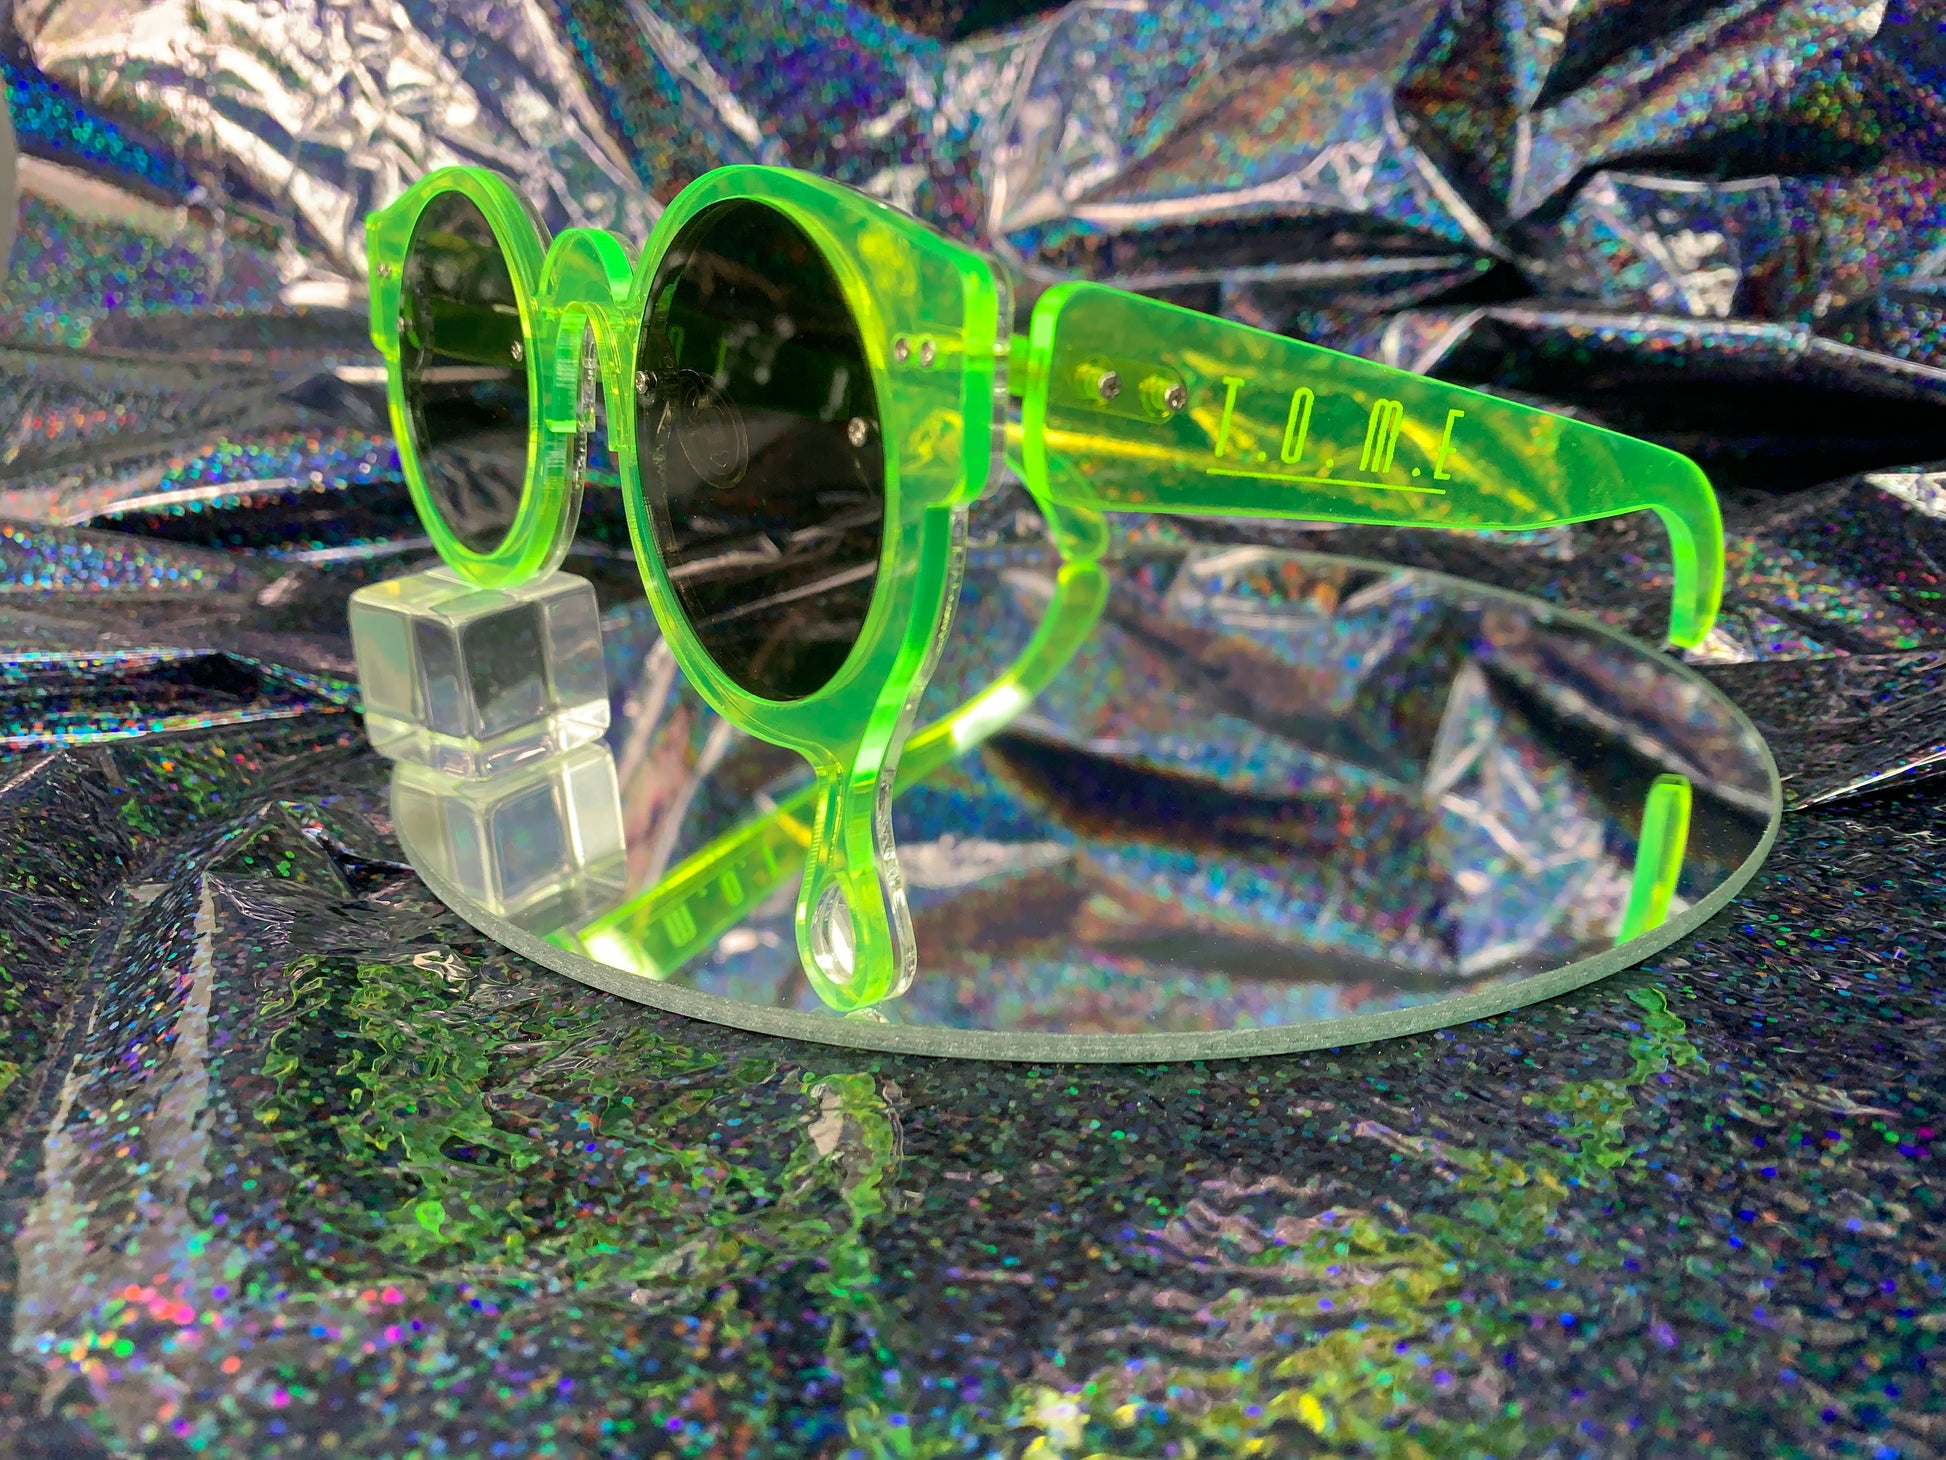 A side view of acrylic laser cut sunglasses with a teardrop accent dripping down the right side of the glasses with the brand logo T.O.M.E. etched on the temple. The color of the sunglasses shown are neon green.